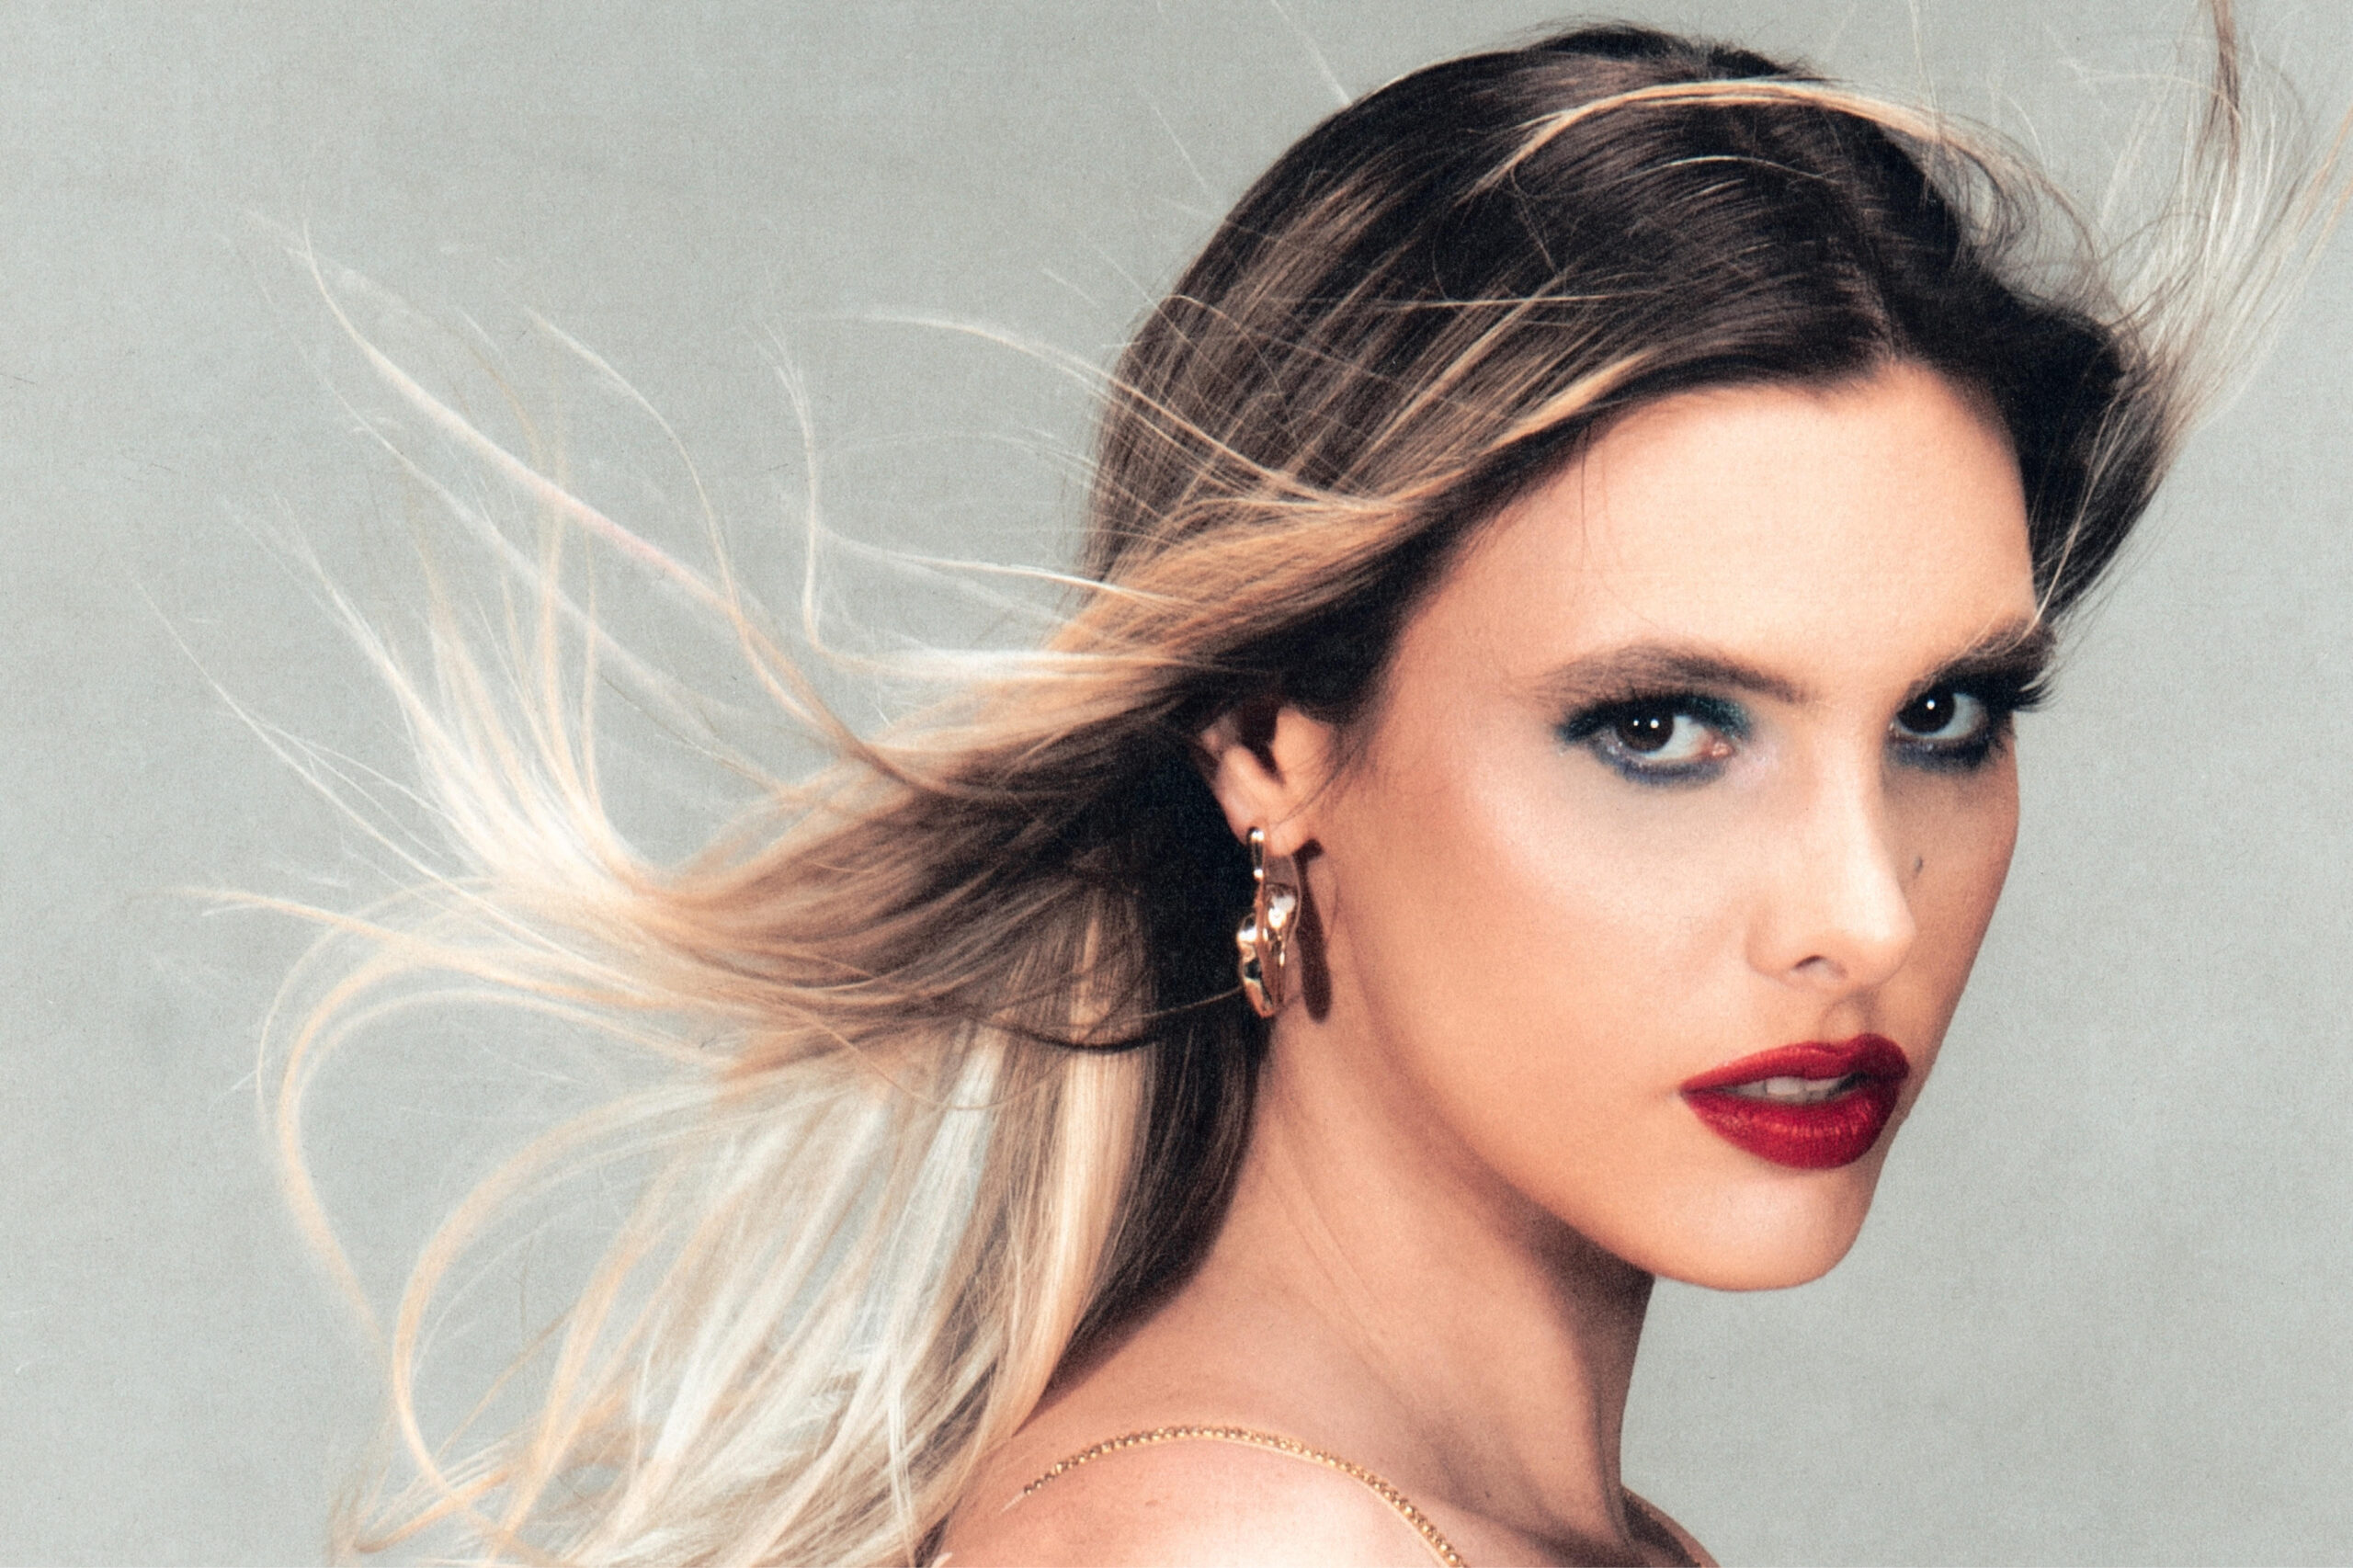 LATINA POWERHOUSE LELE PONS PUTS FAMILY AT THE CORE OF EVERYTHING